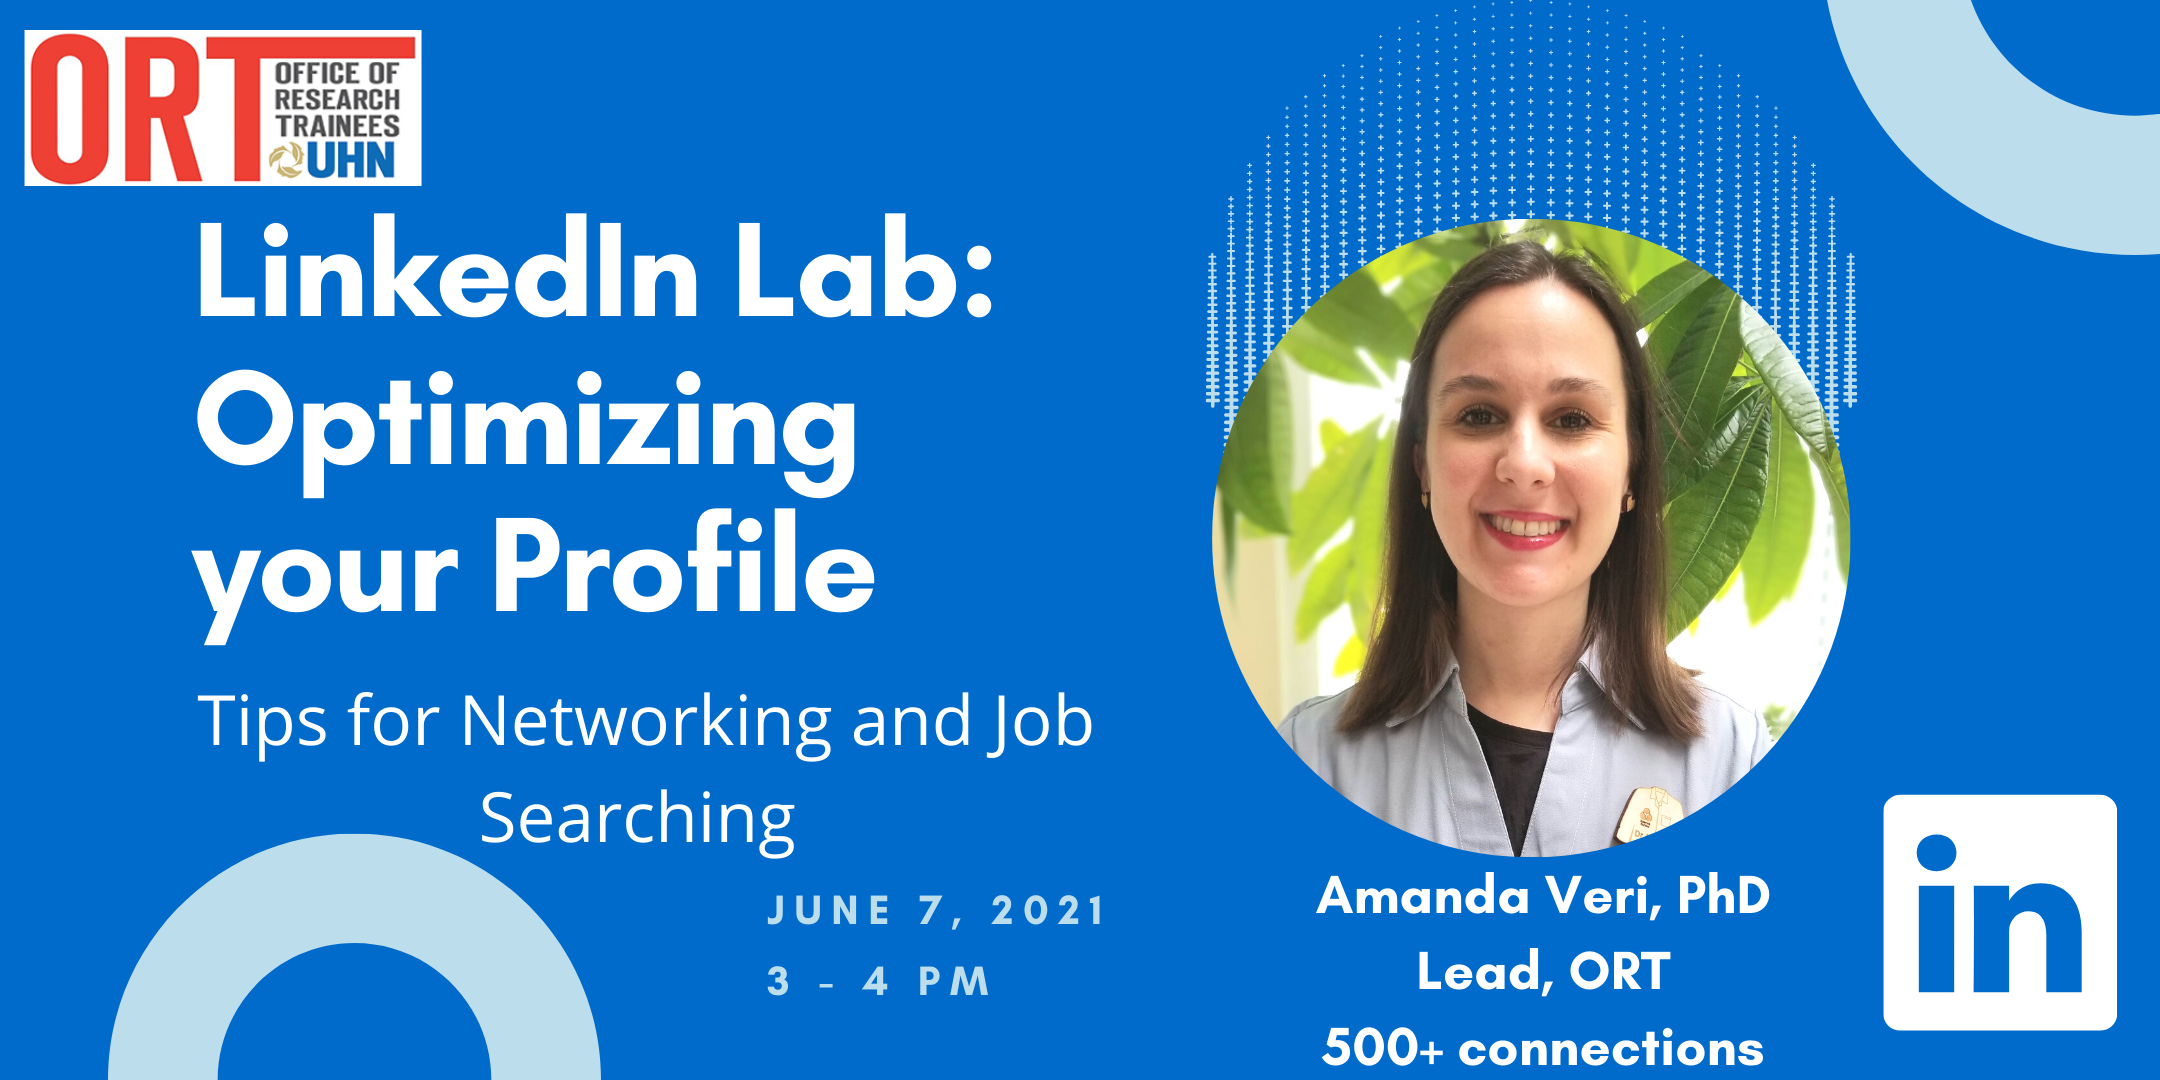 Event poster for LinkedIn Lab: Optimizing Your Profile webinar. The poster says, tips for networking and job searching. June 7, 2021, 3-4 pm. There is a photo of Amanda Veri, PhD on the right. It says Lead, ORT, 500+ connections below. The LinkedIn logo is on the bottom right corner. The poster is a bright blue with light blue circles. All text is in white.